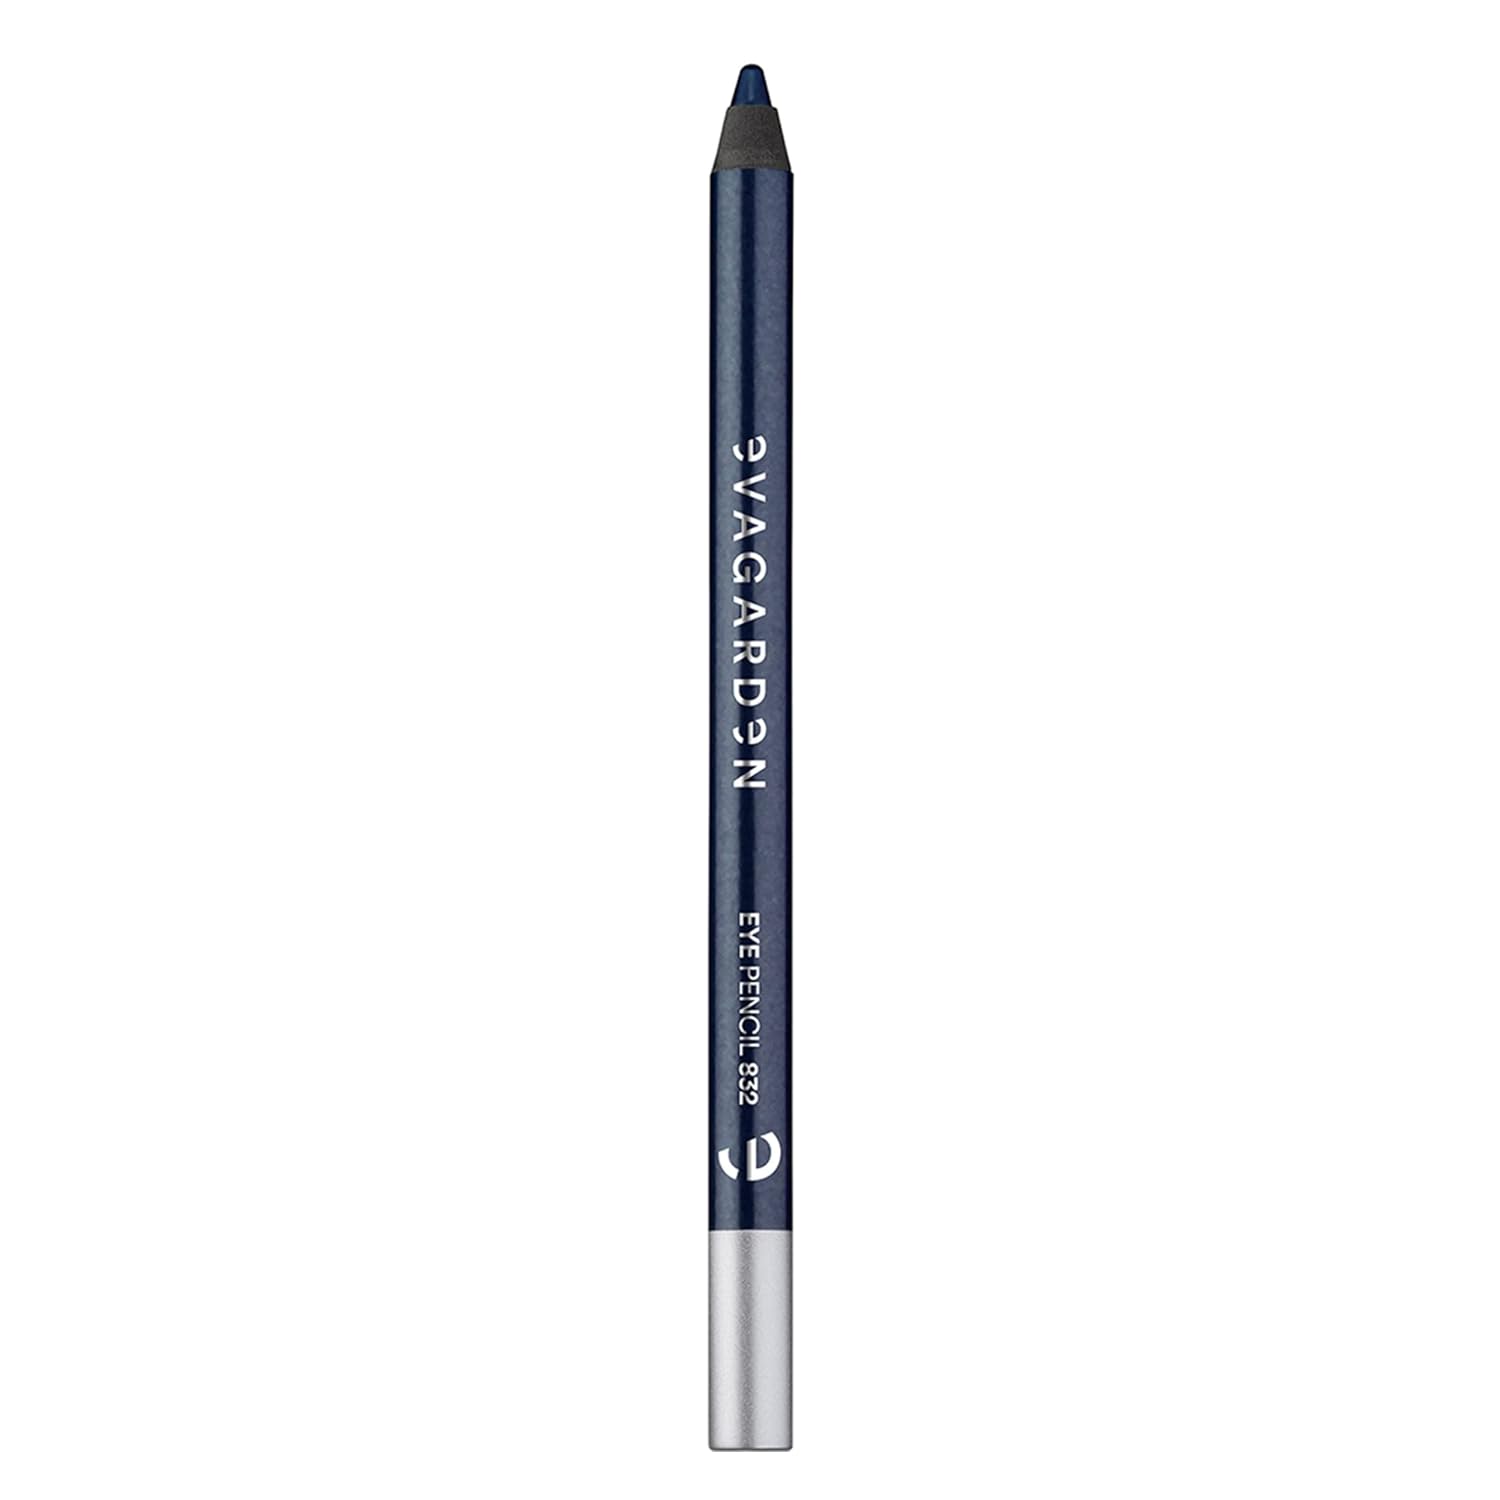 EVAGARDEN Superlast Eye Pencil - Pure and Intense, No Transfer Color Release - Stays Through All Weather Conditions - Emphasize and Enhance Your Look Instantly - 832 Blue Night - 0.07